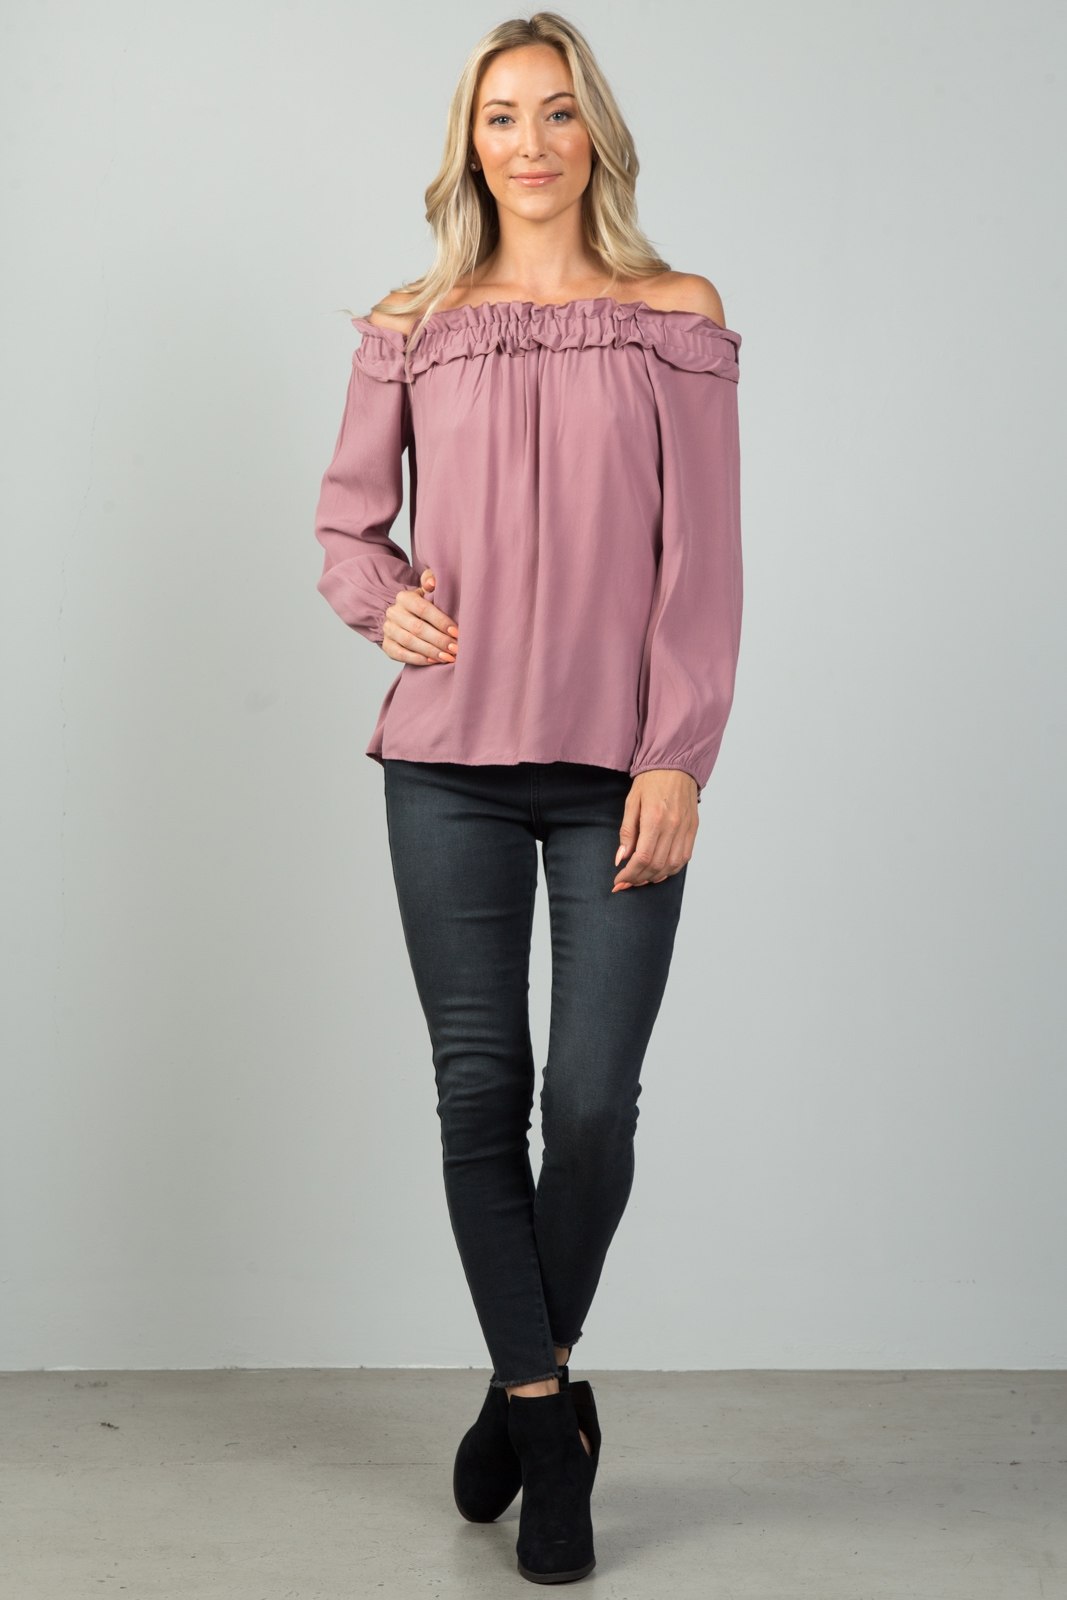 Ladies fashion  off the shoulder frill top